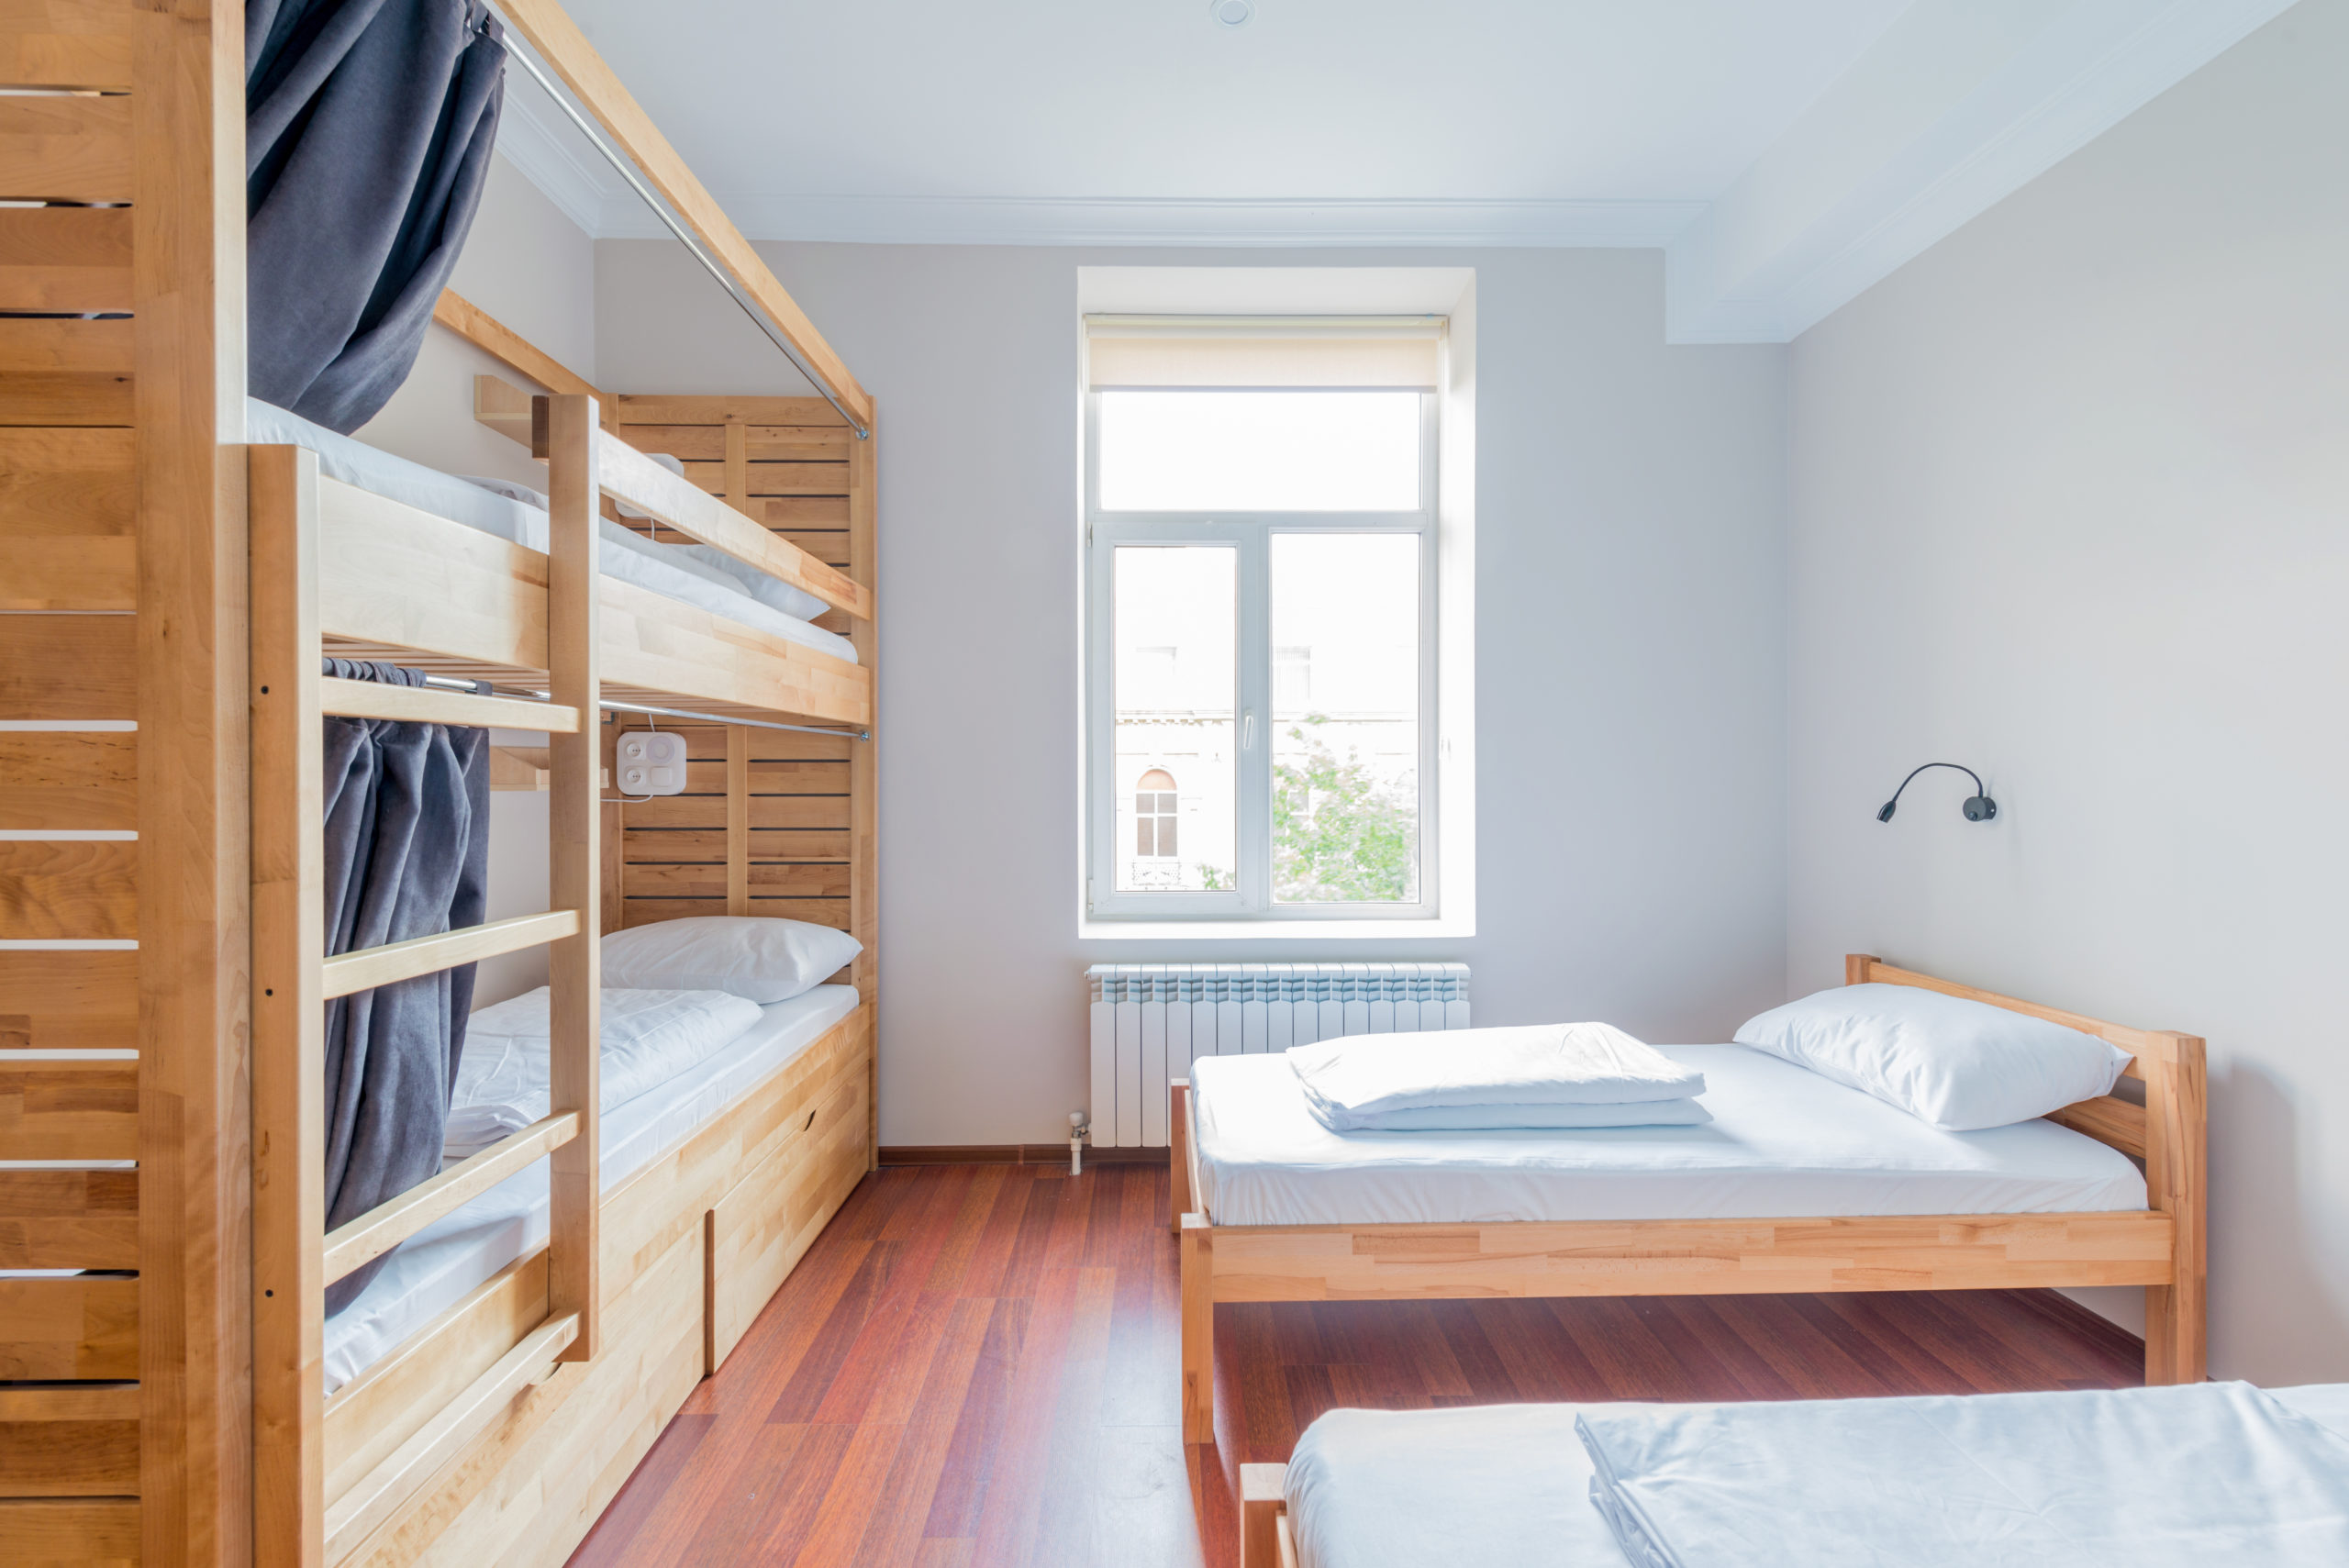 dormitory beds arranged in room